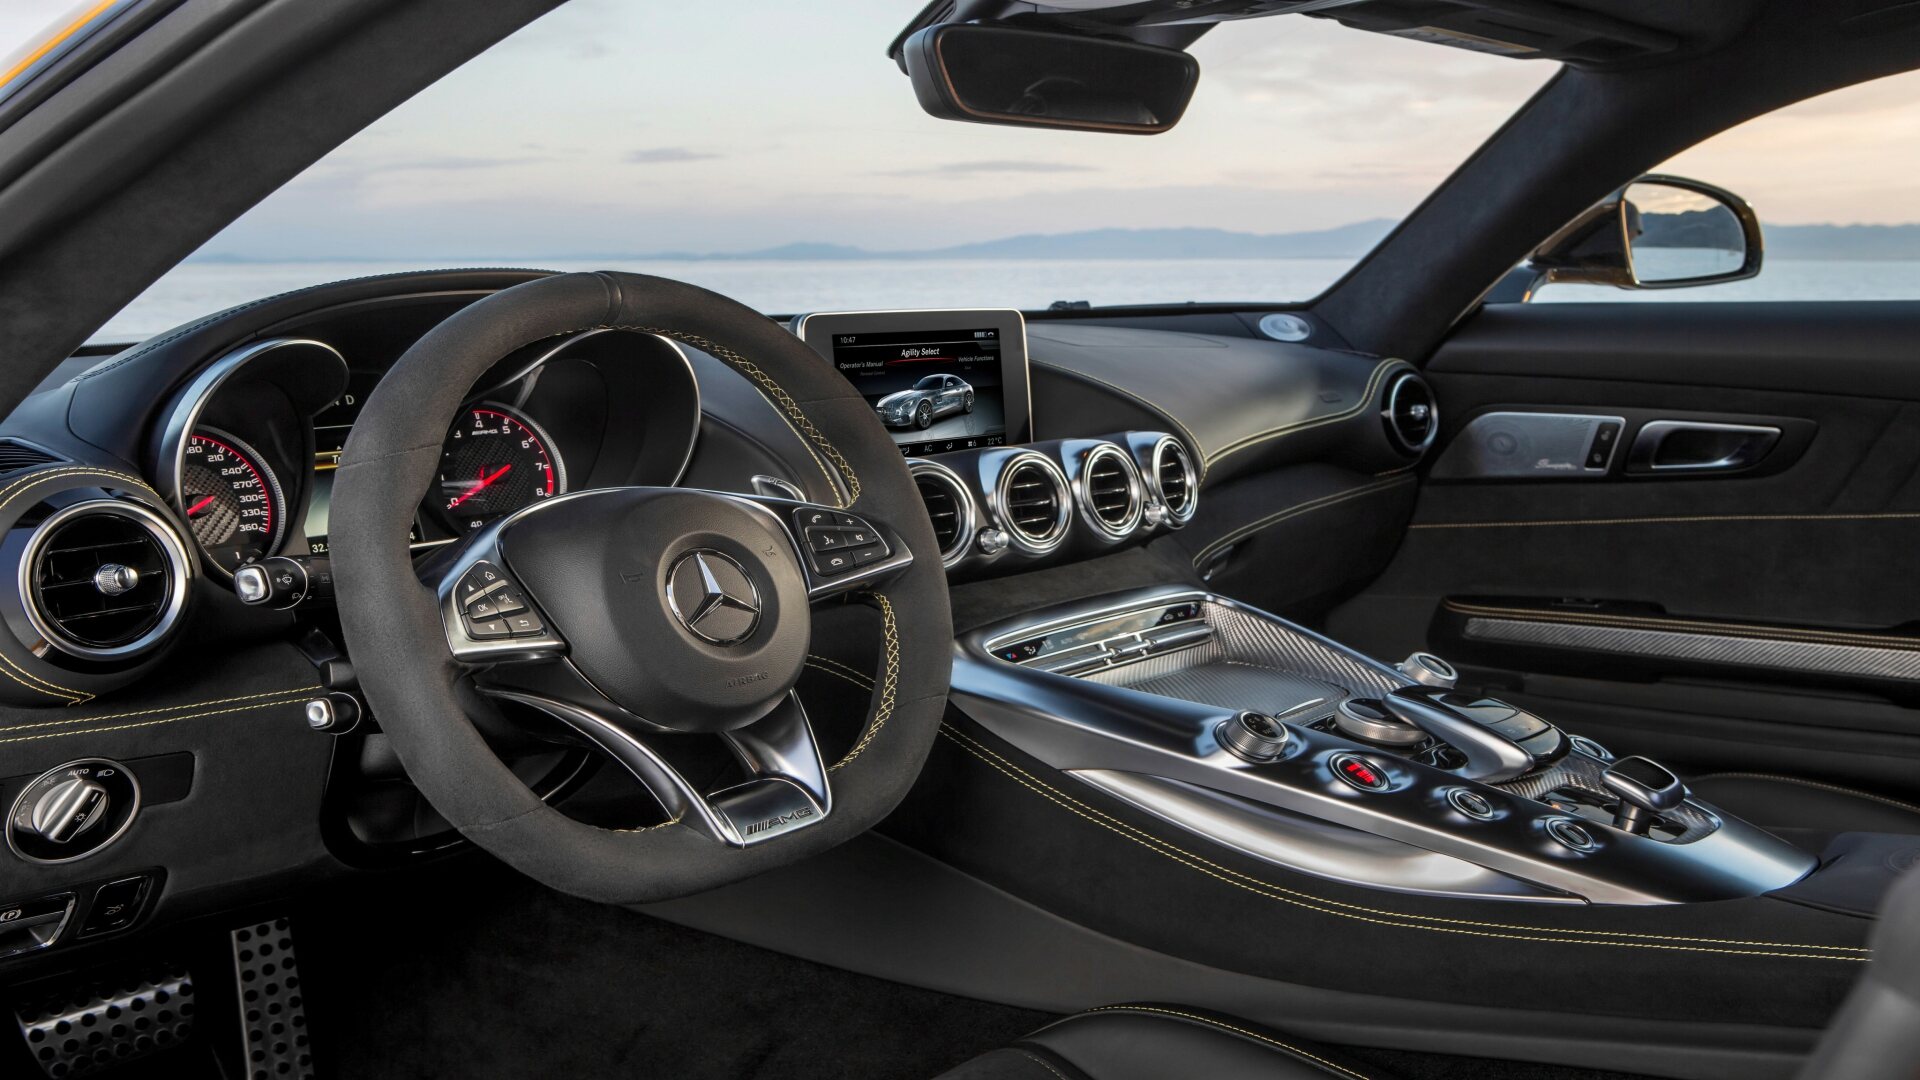 The Interior, Steering, And Central Console Of A Mercedes-AMG GT